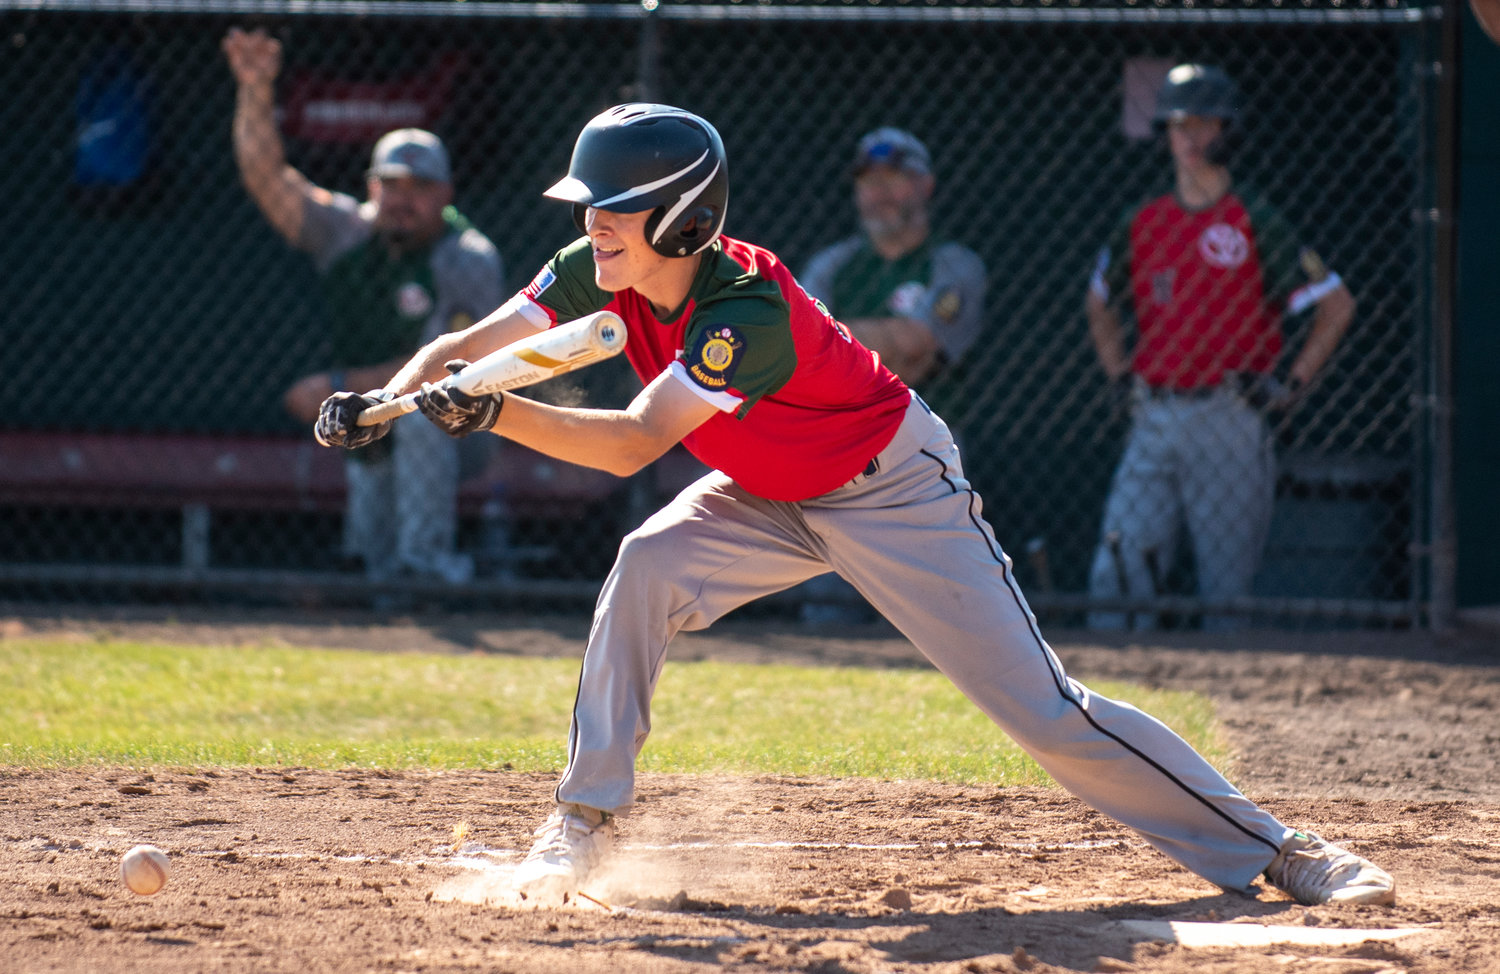 I-5 Toyota/Mountain Dew’s Lethon Fitch lines up a bunt against Lower Columbia Baseball Club on Tuesday at Ed Wheeler Field.